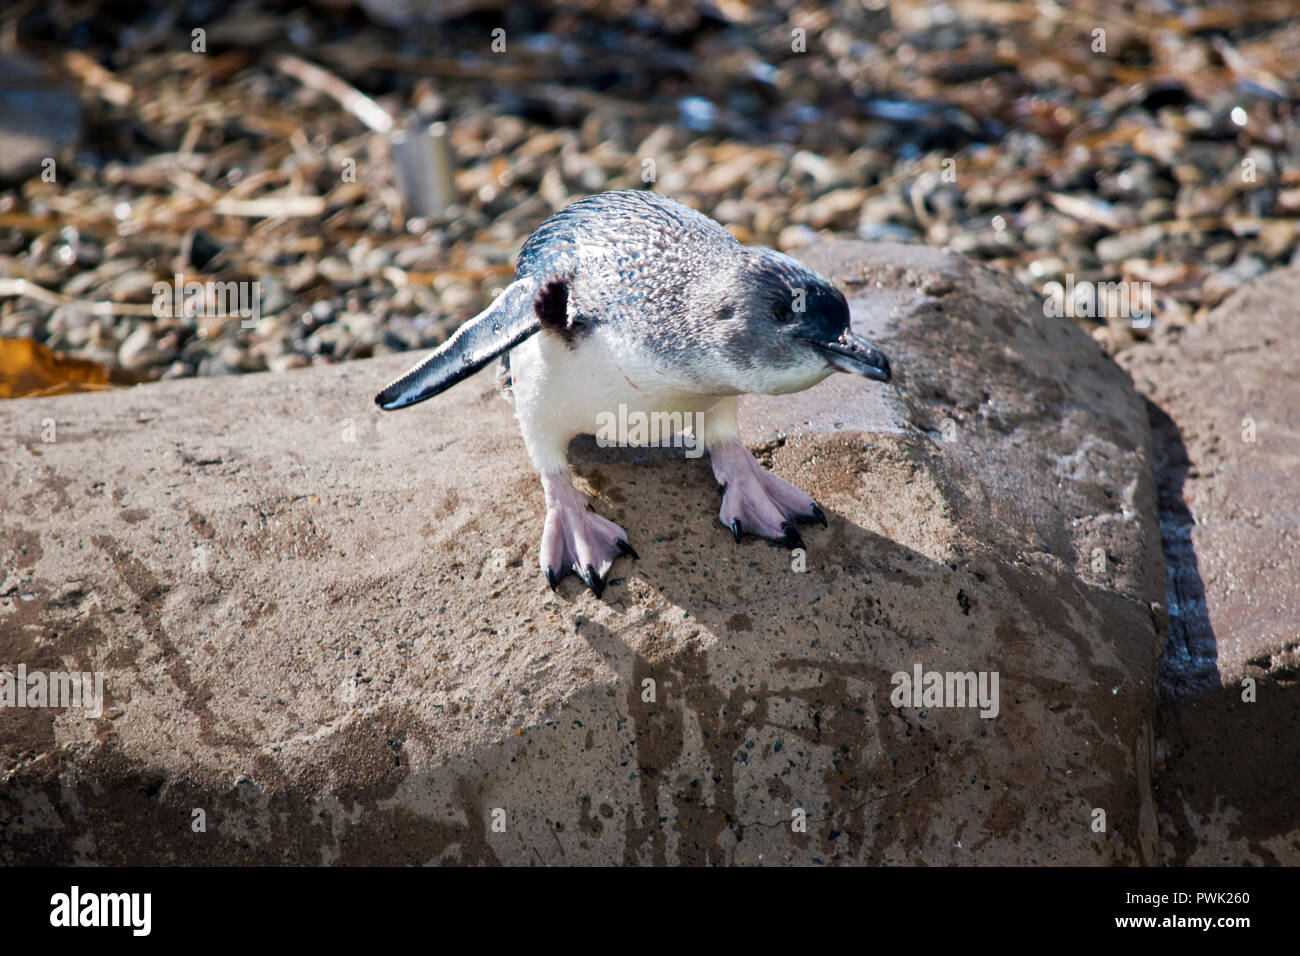 the penguin is standing on a rock about to jump into the water Stock Photo